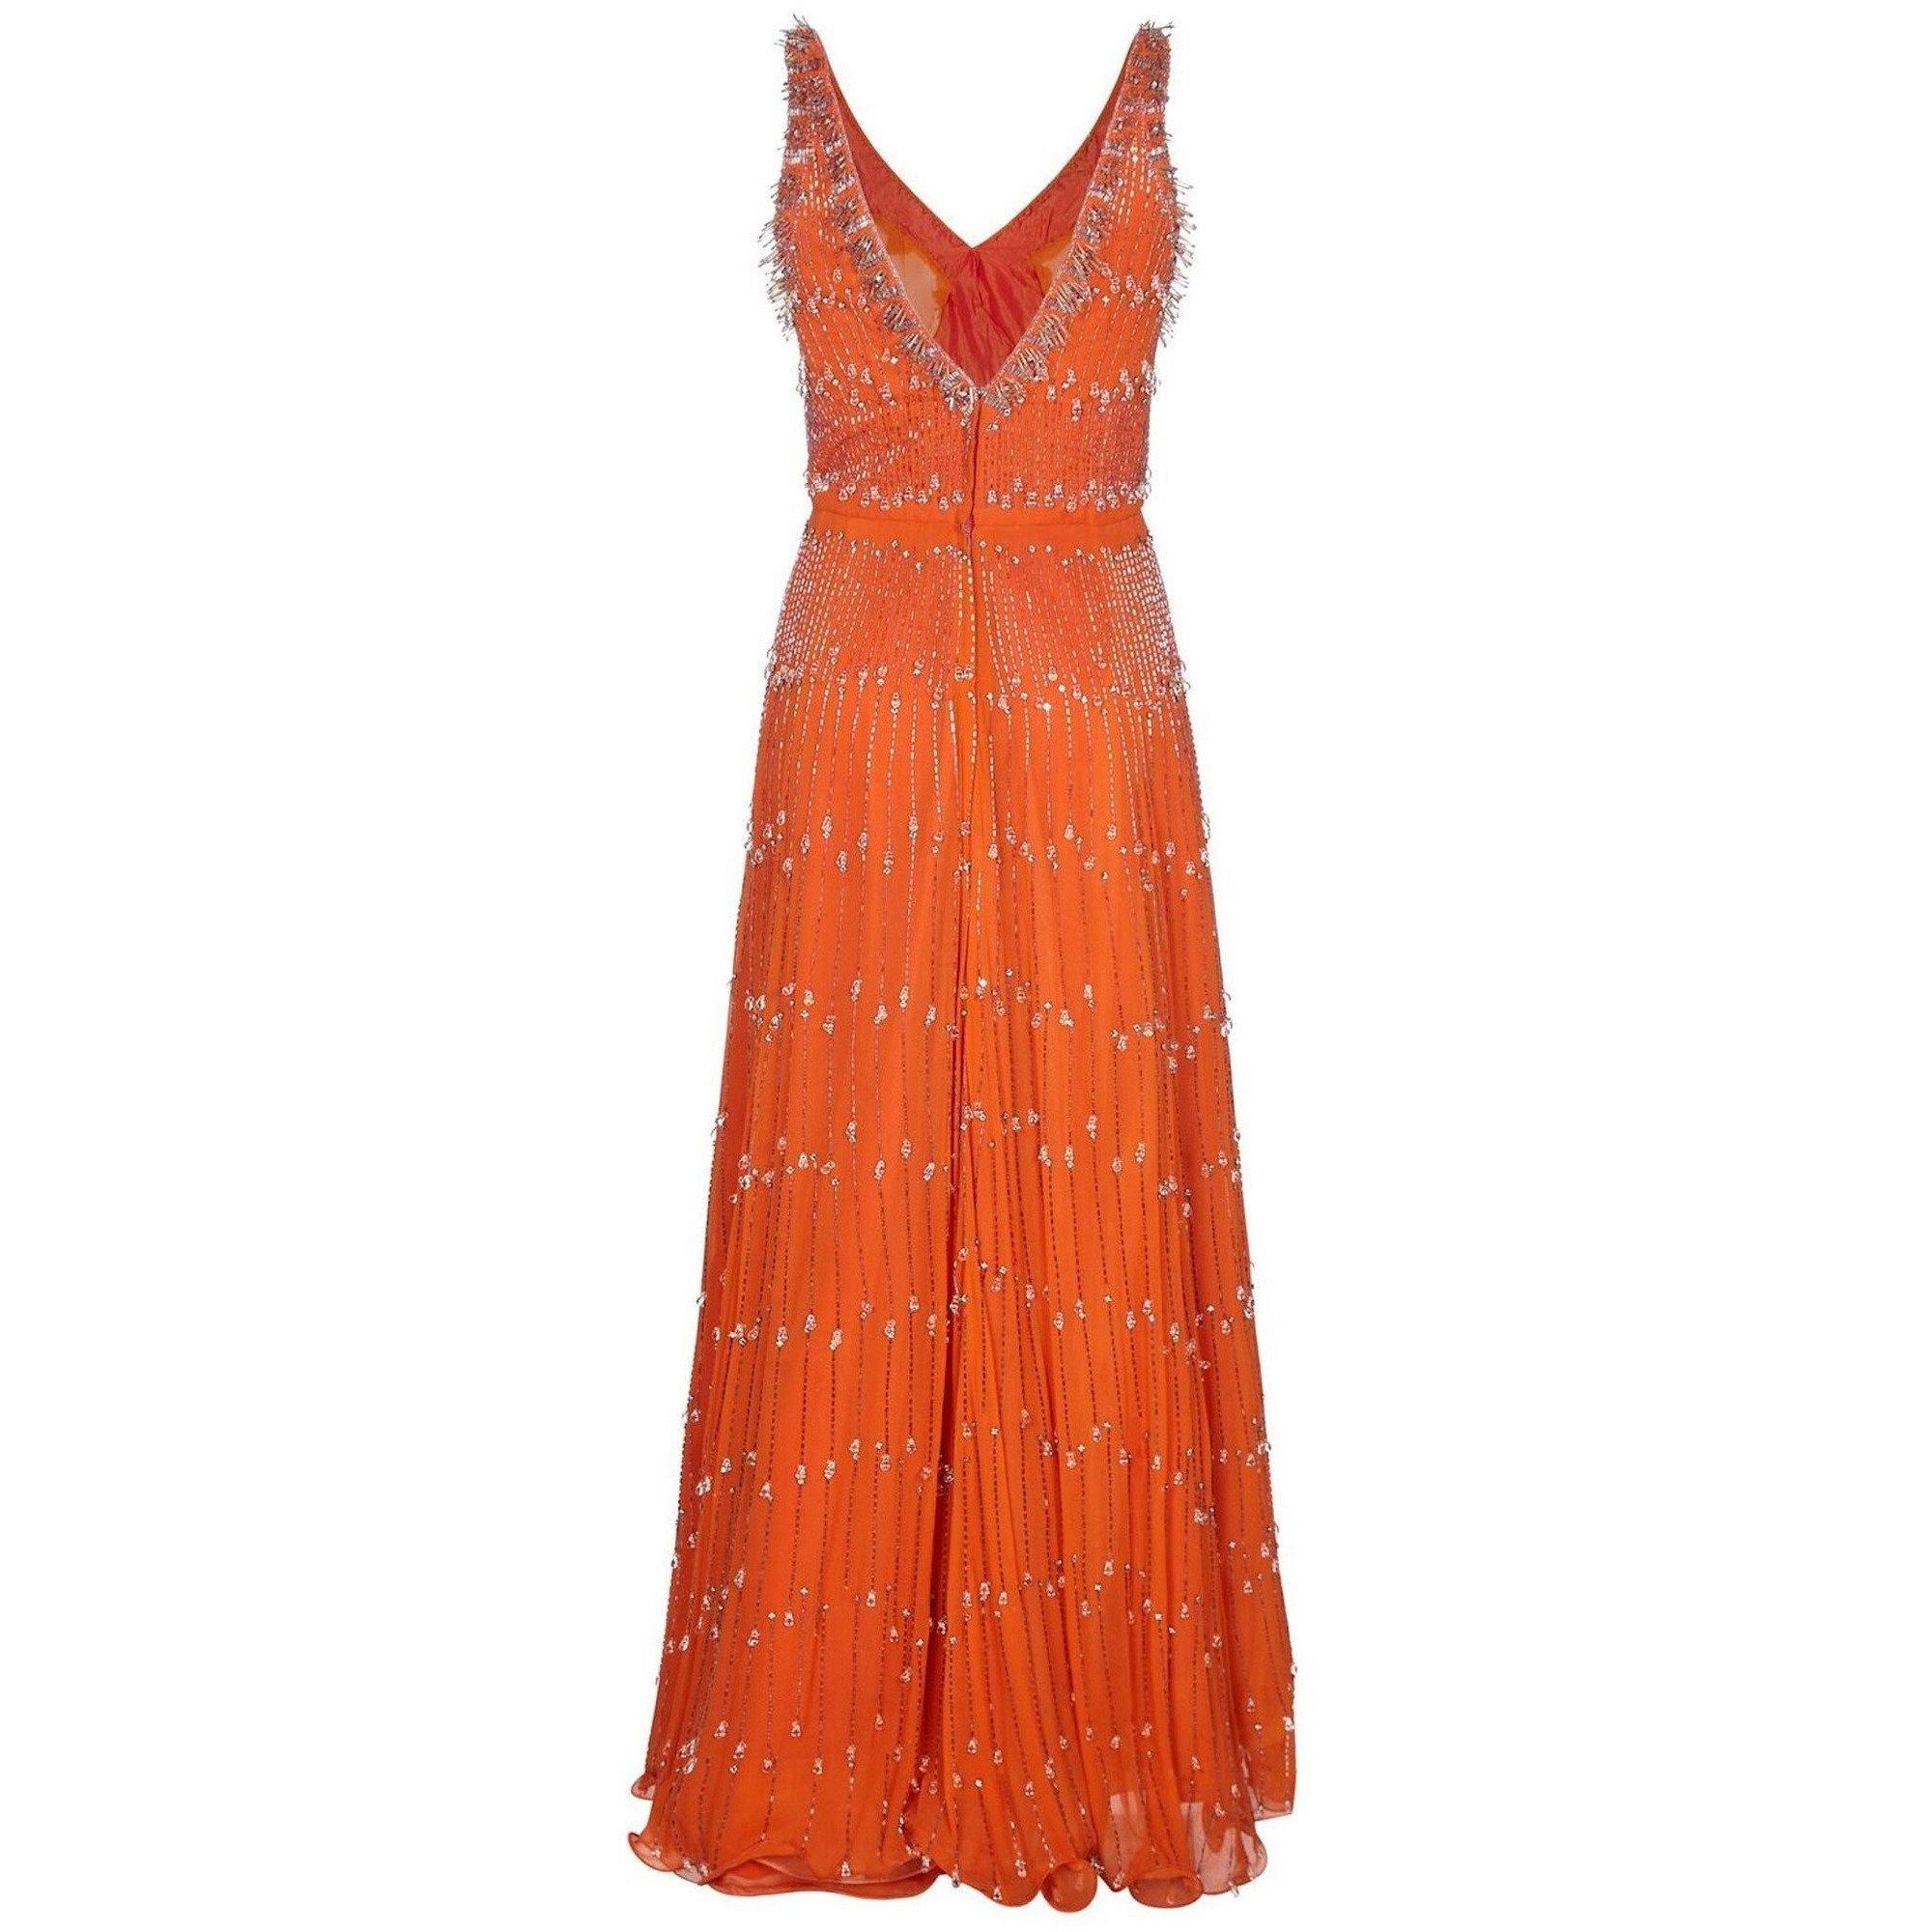 This magnificent late 1960s silk chiffon beaded gown exudes haute couture quality and is in excellent vintage condition. The burnt orange silk chiffon overlay showcases some fabulous crystal embellishment. Silver-toned bugle beads are arranged to